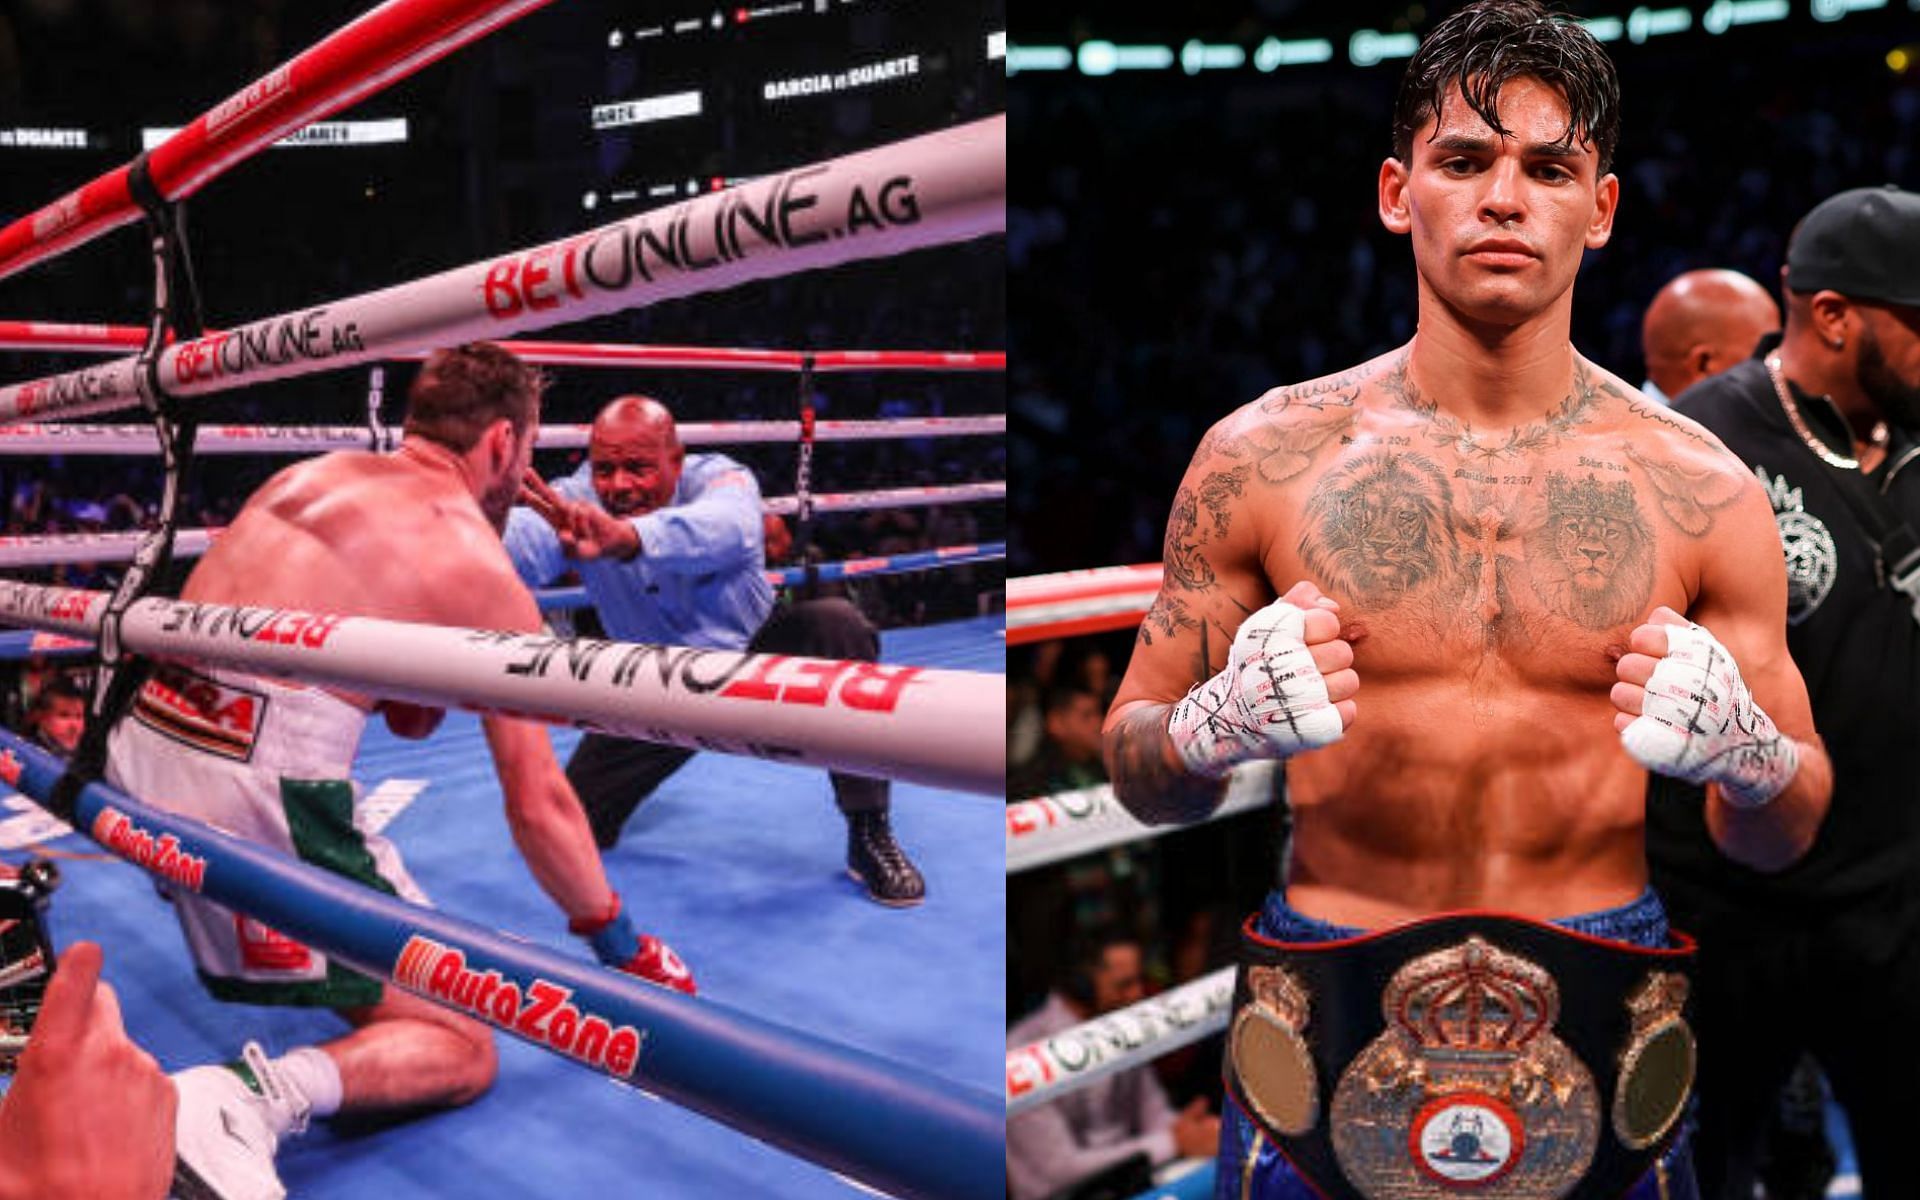 Oscar Duarte during his ten-count against Ryan Garcia (left) and Ryan Garcia (right) [Images Courtesy: @GettyImages]